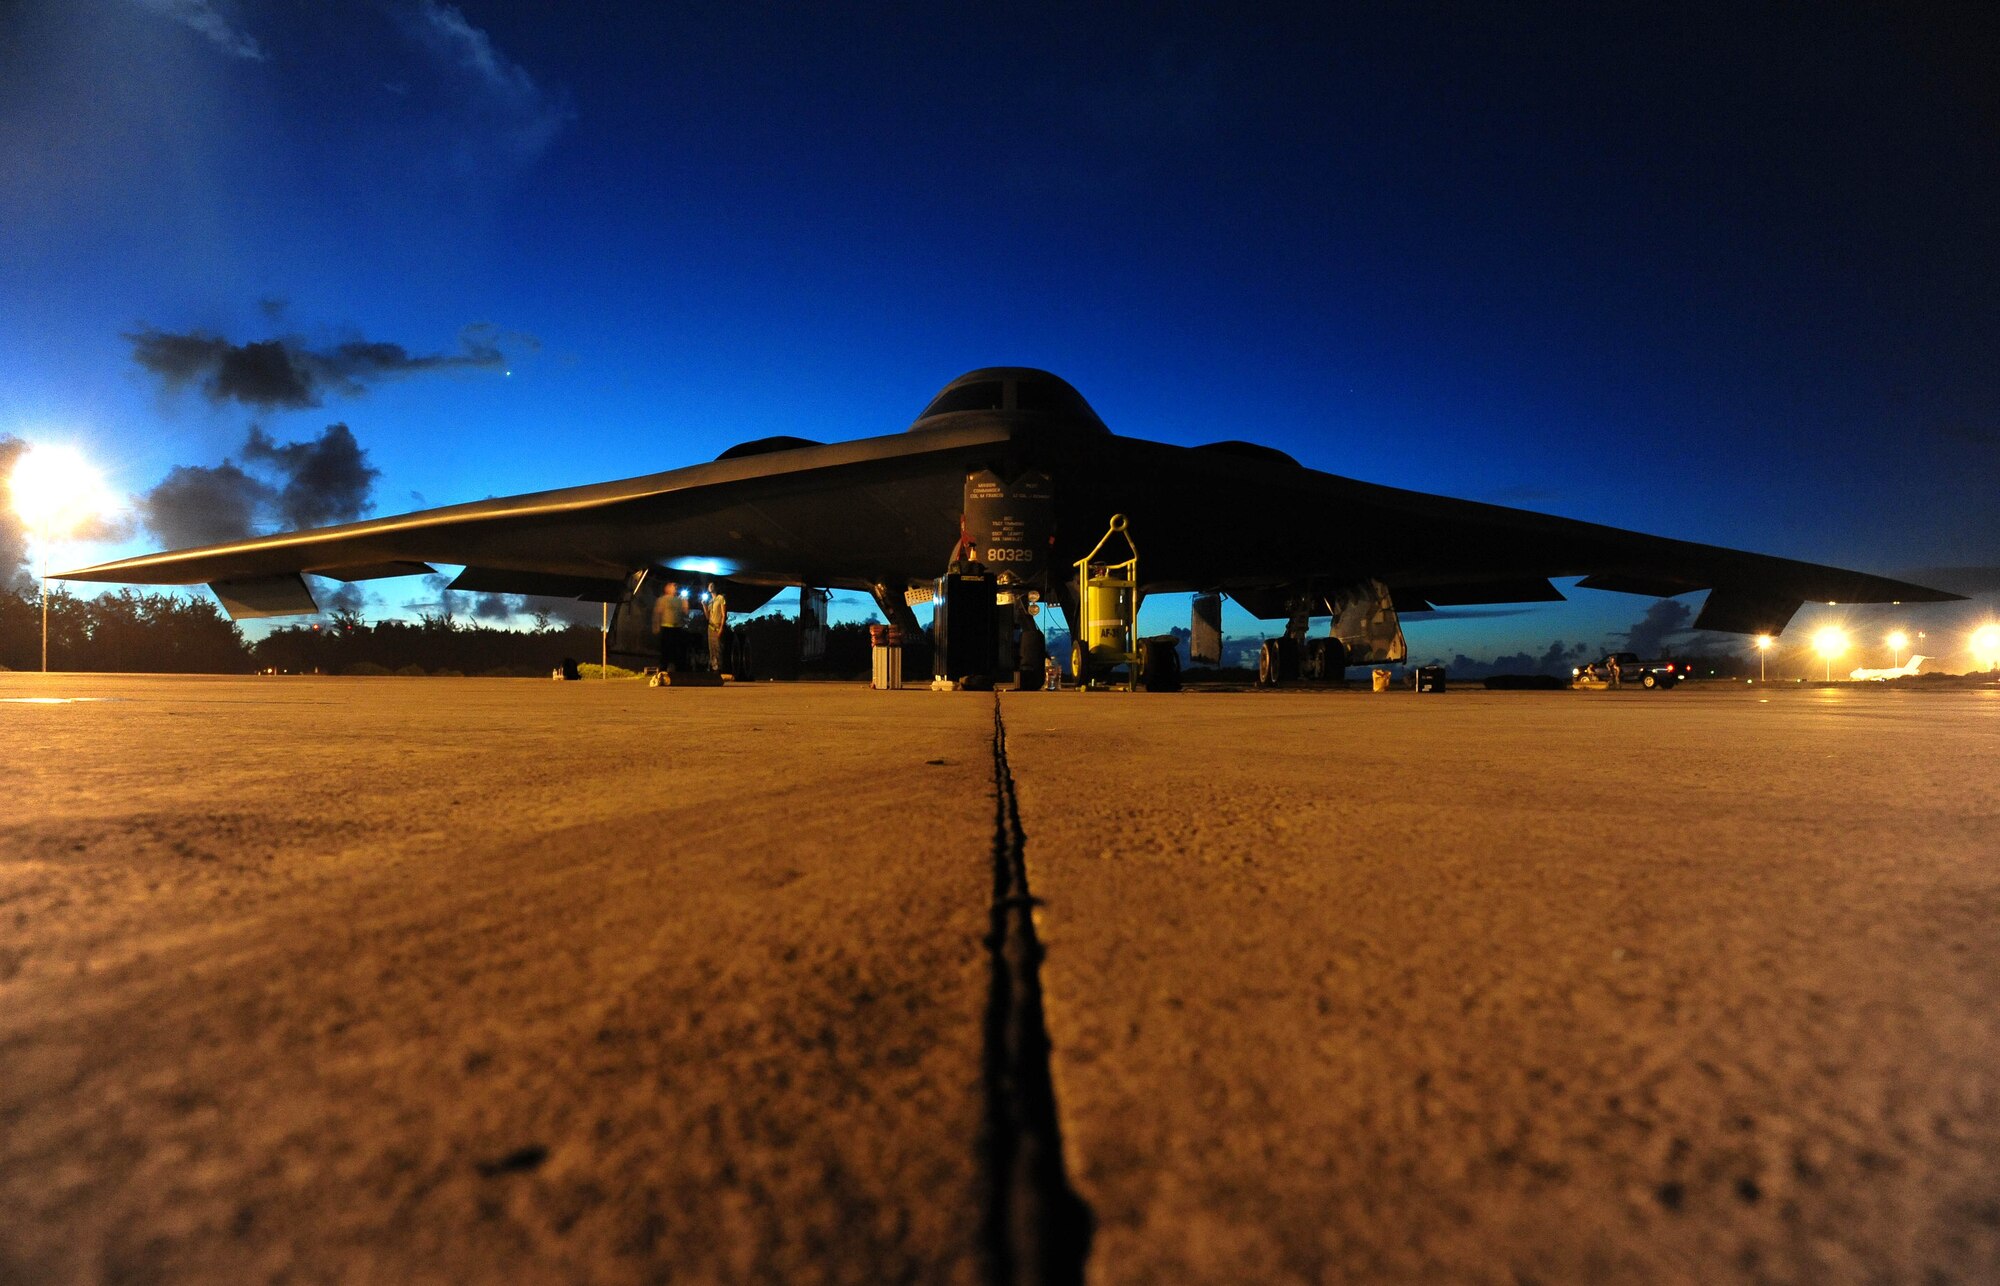 Crew chiefs from the 393rd Aircraft Maintenance Unit prepare to tow a B-2 Spirit while deployed to an undisclosed location in the U.S. Pacific Command area of operations March 11, 2016. Bomber training missions and deployments ensure crews maintain a high state of readiness and proficiency and demonstrate the ability to provide an always-ready global strike capability. (U.S. Air Force photo by Senior Airman Joel Pfiester)   